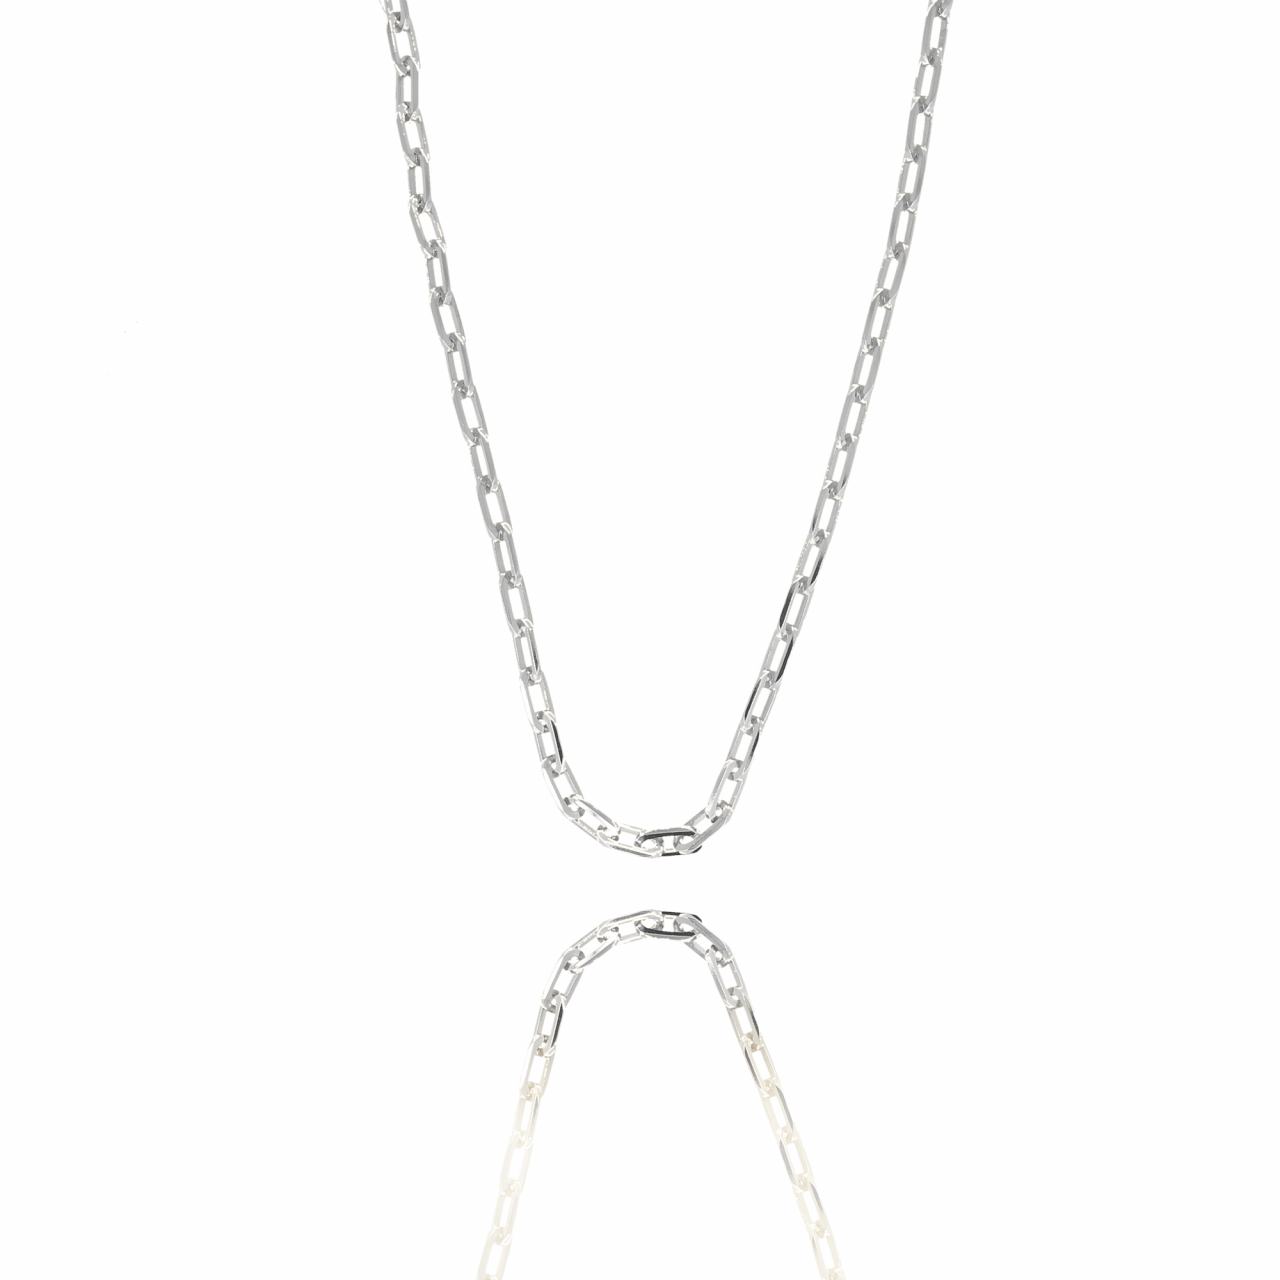 Silver closed forever S chain necklace